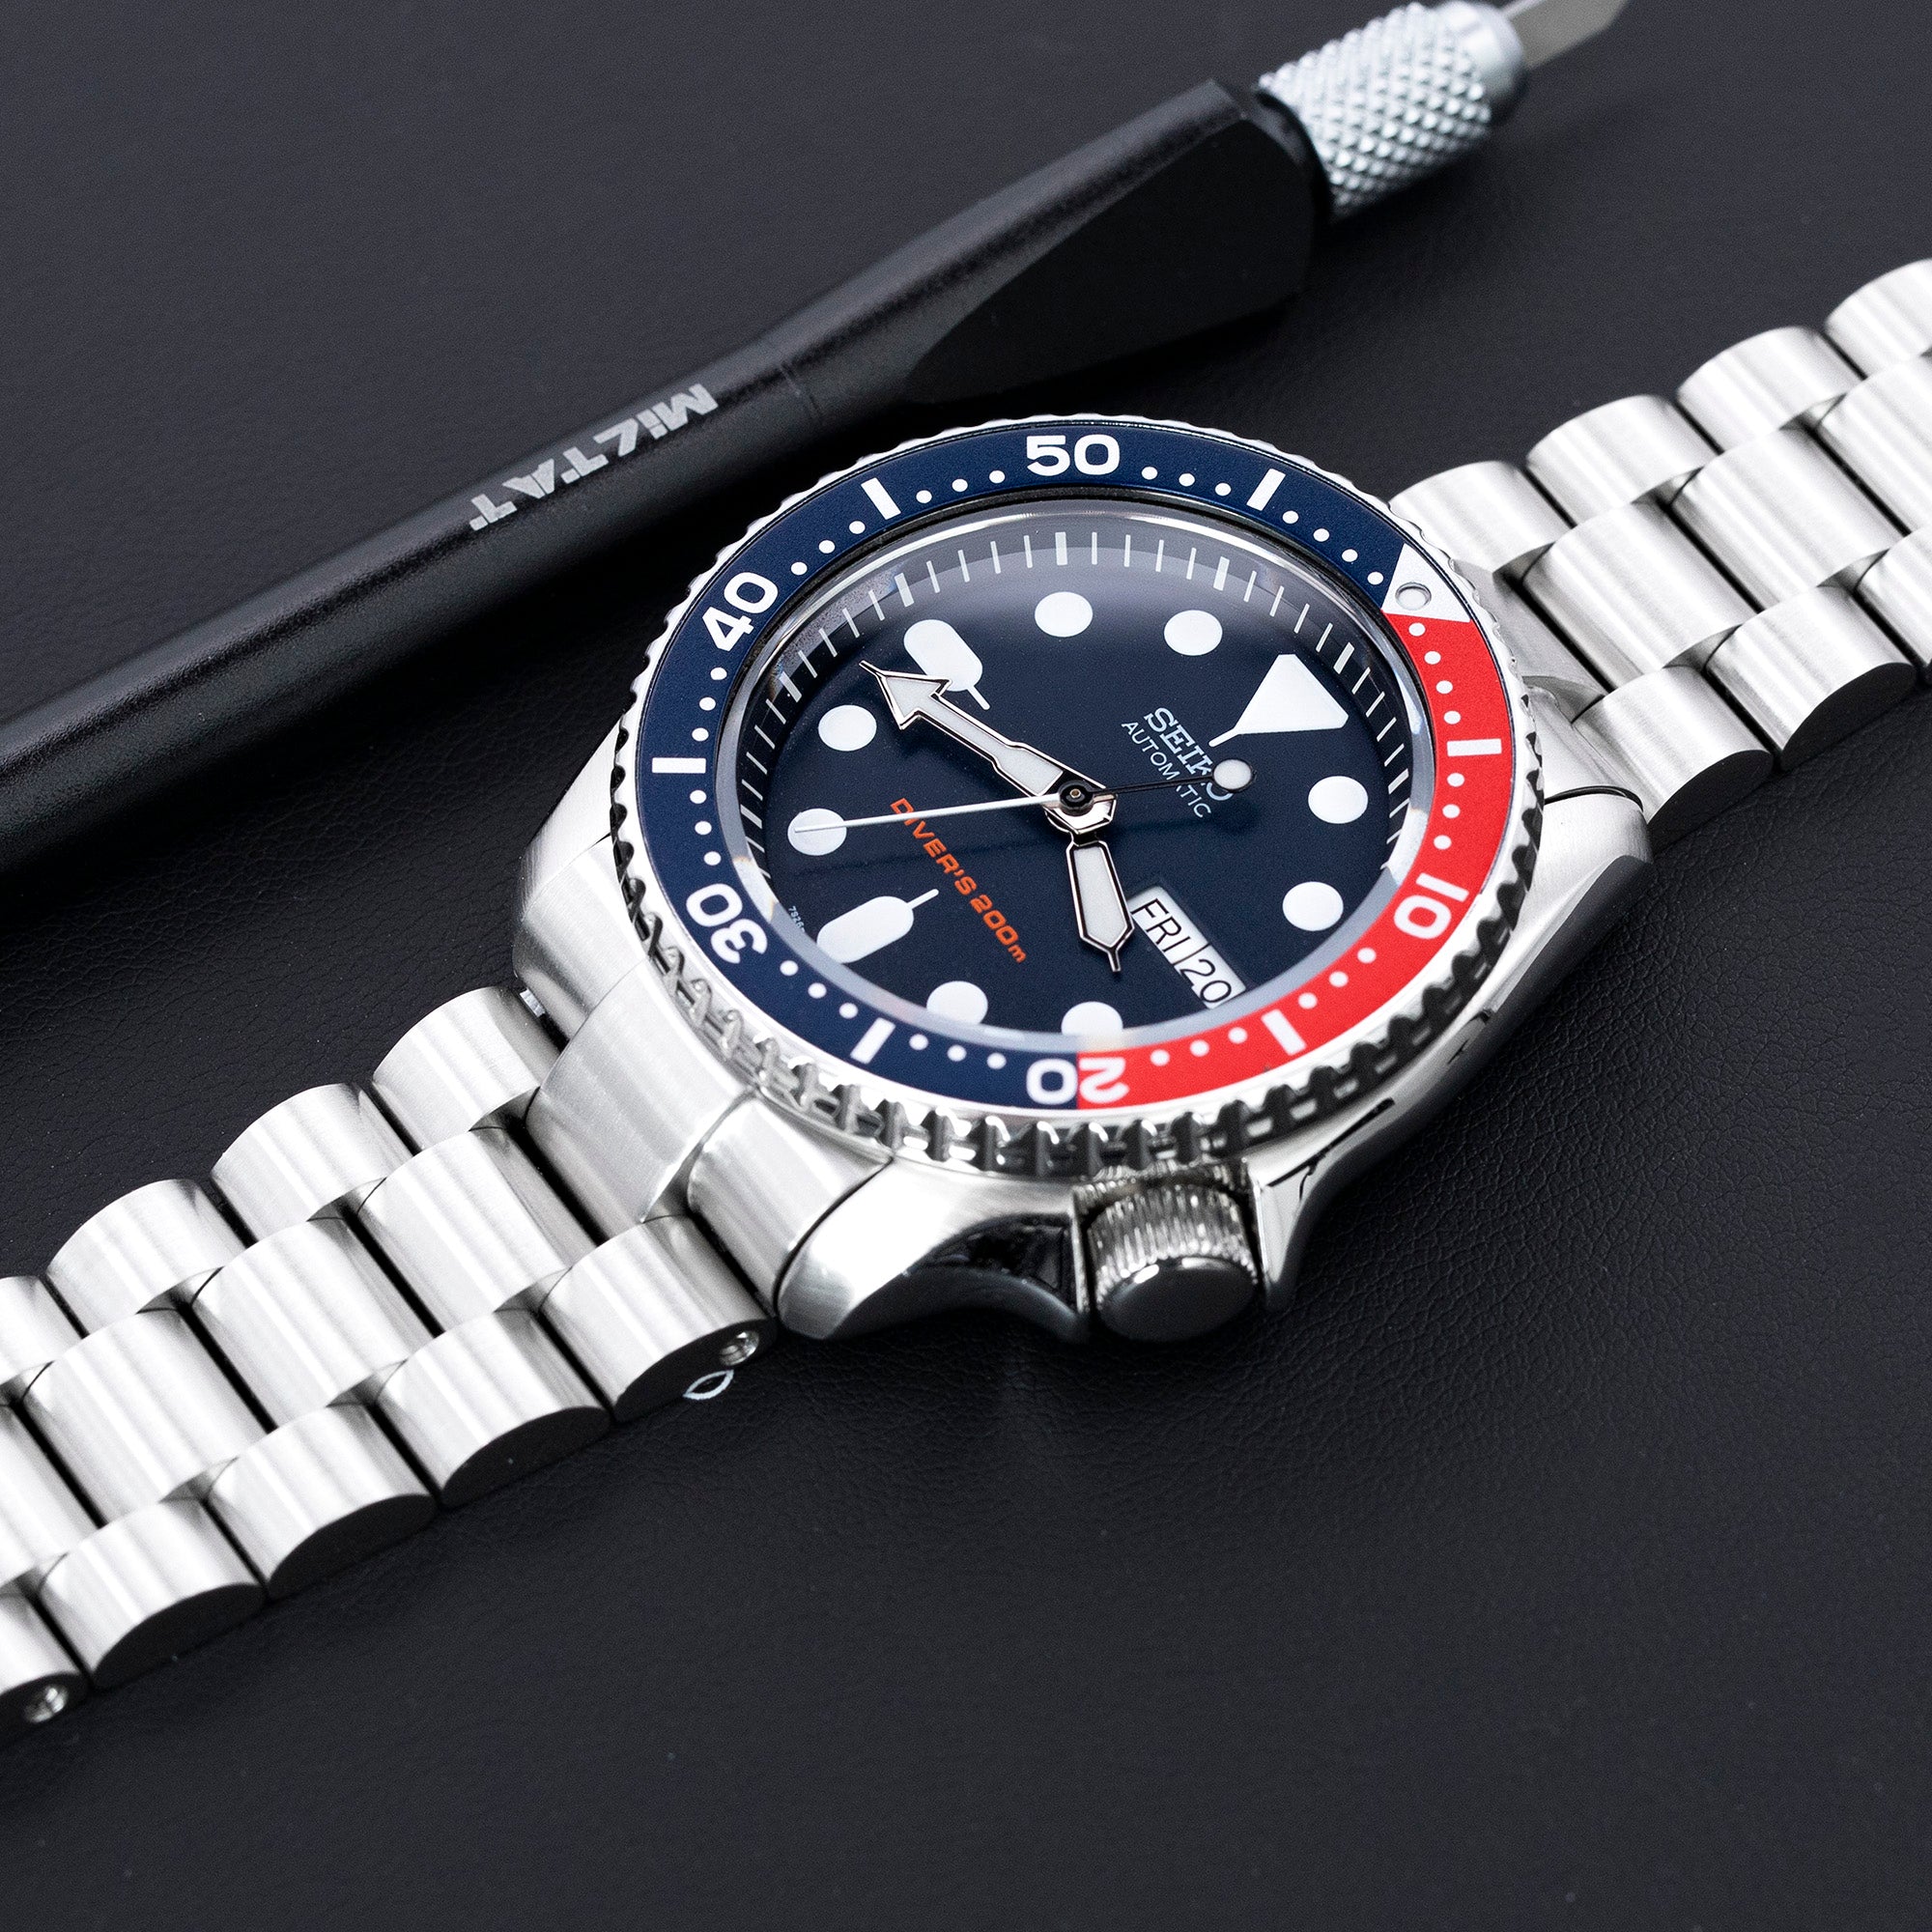 Endmill Stainless Steel Watch Bracelet for Seiko New Turtles